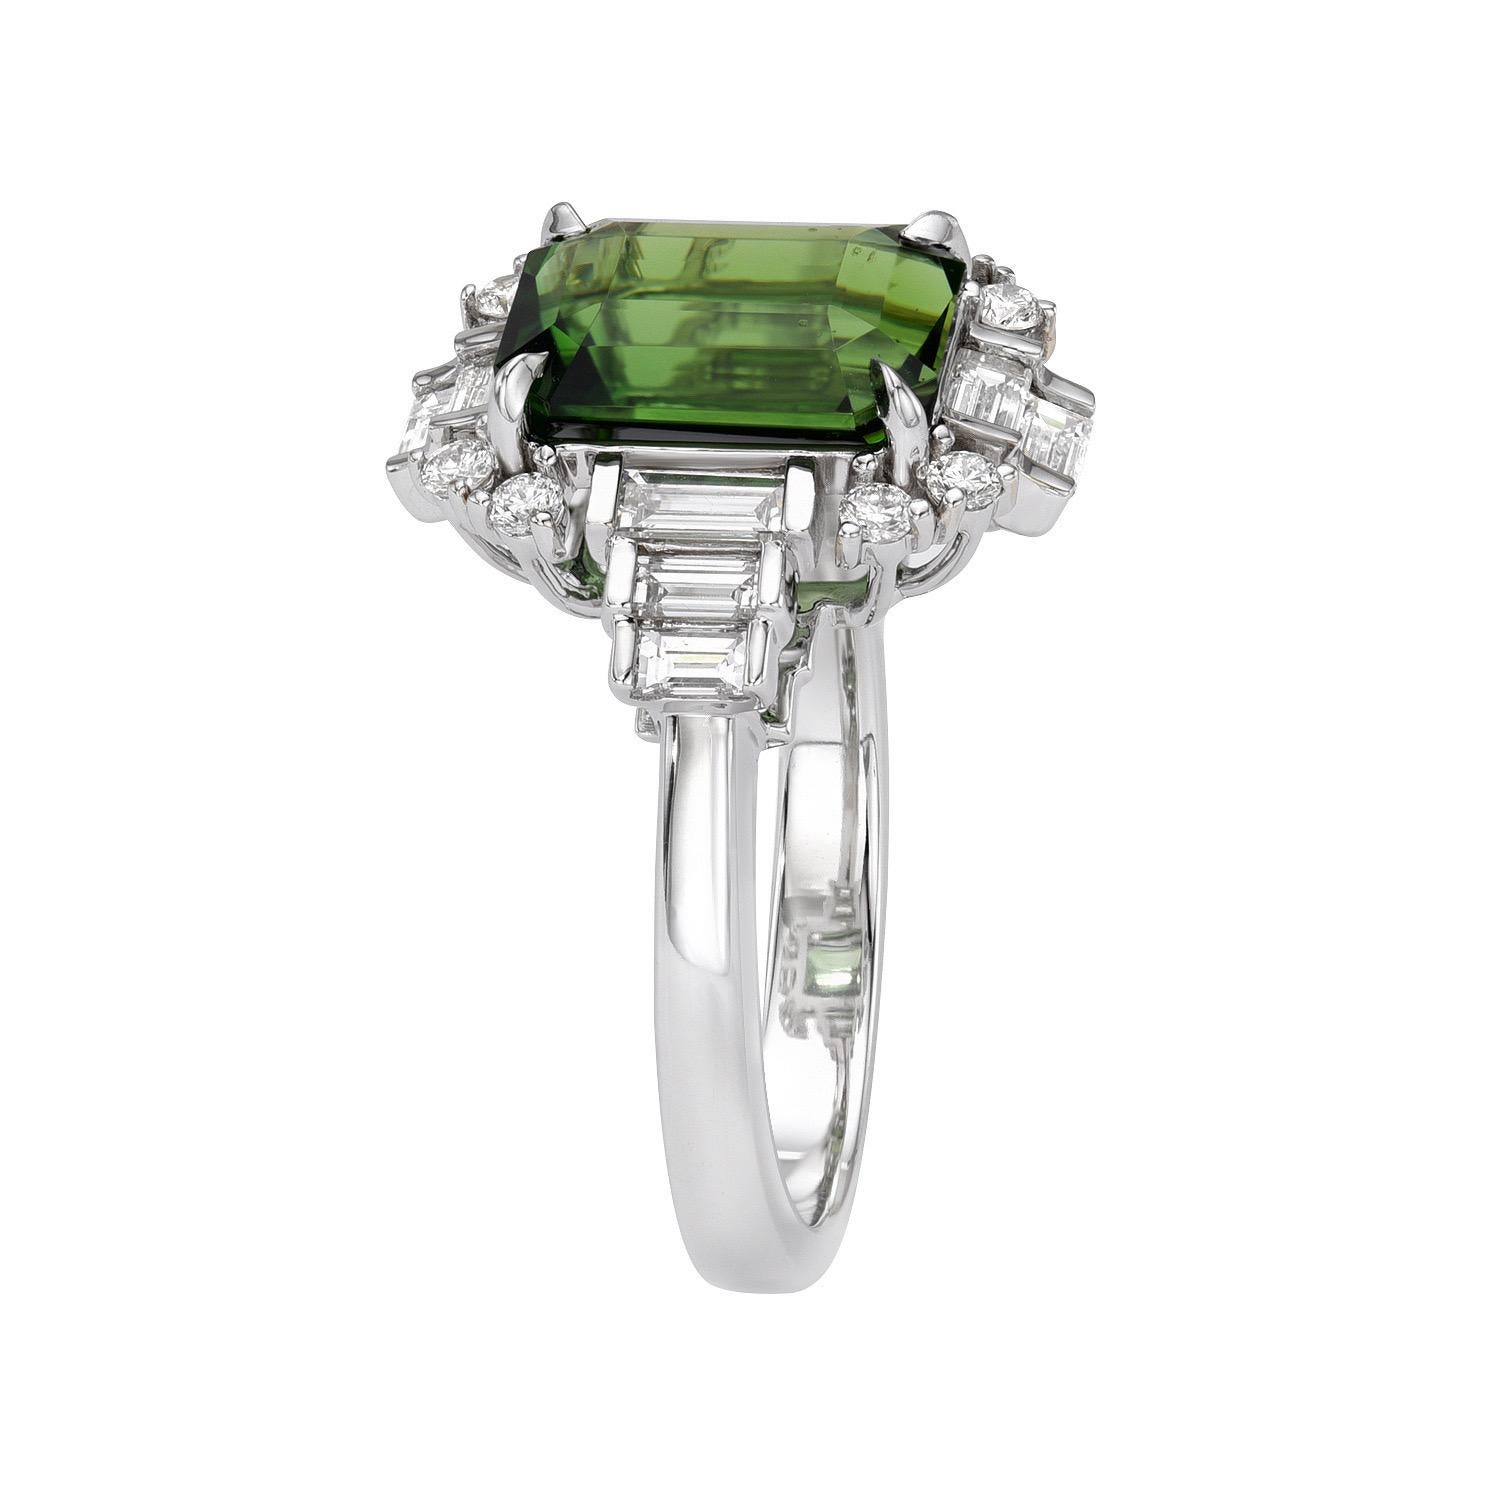 Rare and exquisite 3.15 carat Chrome Tourmaline Emerald Cut, 18K white gold ring, decorated with a total of 0.63 carat collection baguette diamonds and 0.16 carat collection round brilliant diamonds.
Ring size 6.5. Resizing is complementary upon